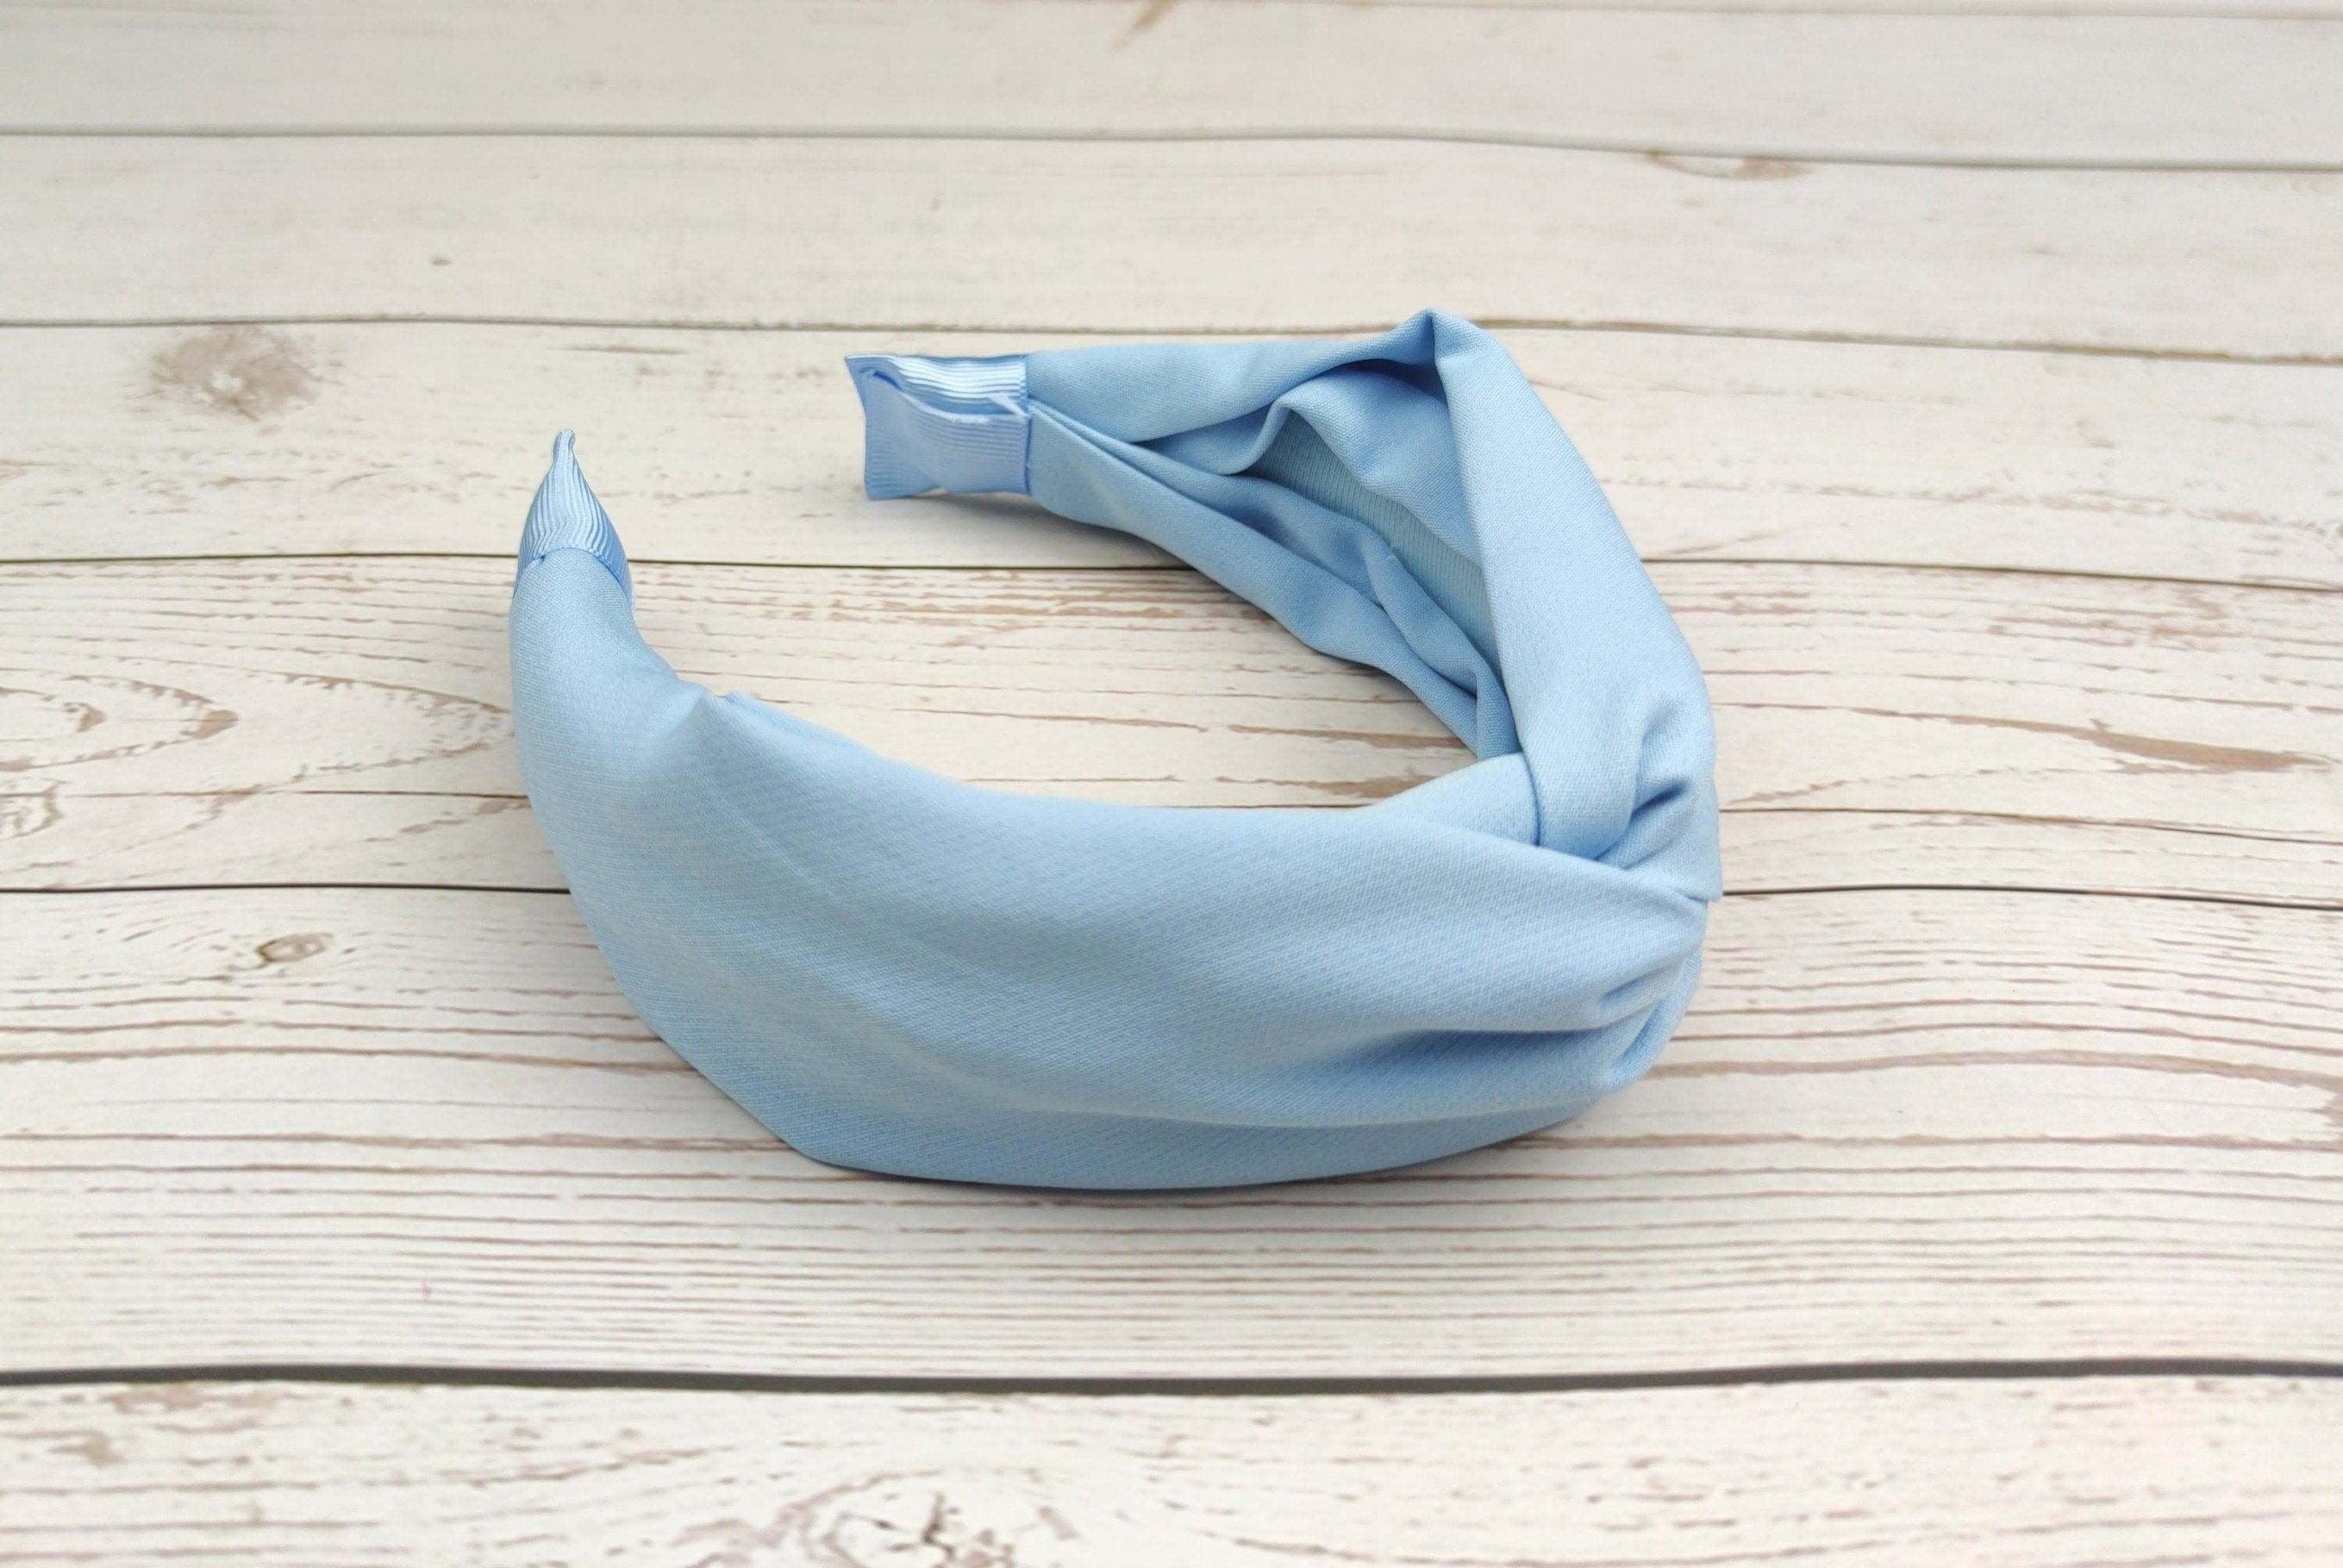 Delicate Baby Blue Twist Knot Headband - Women's Classic and Fashionable Light Blue Hairband made of Viscose Crepe available at Moyoni Design